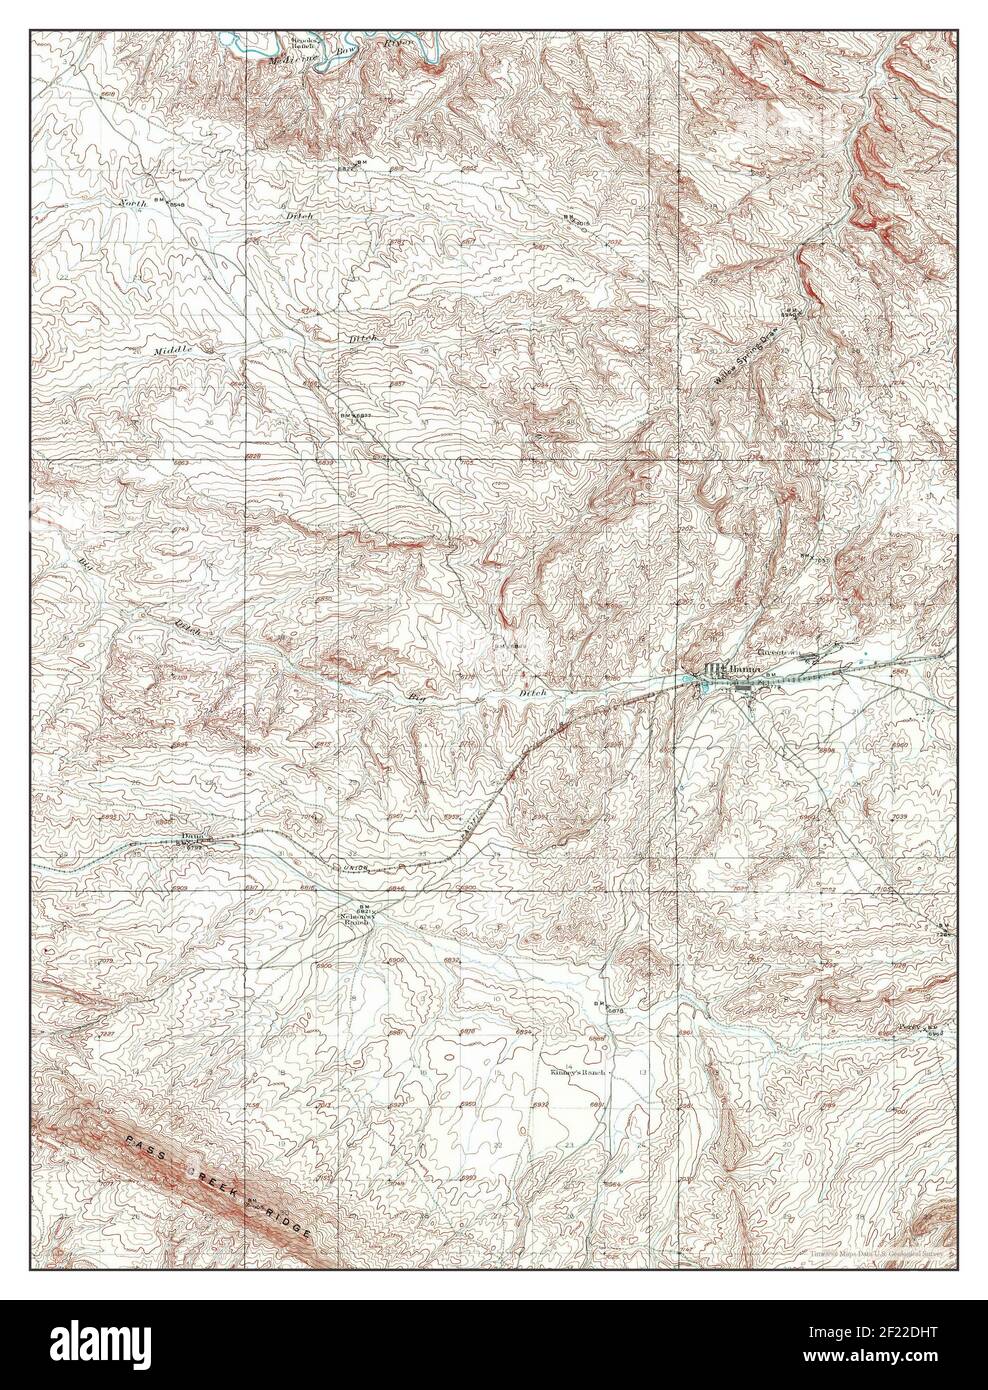 Hanna, Wyoming, map 1914, 1:62500, United States of America by Timeless Maps, data U.S. Geological Survey Stock Photo